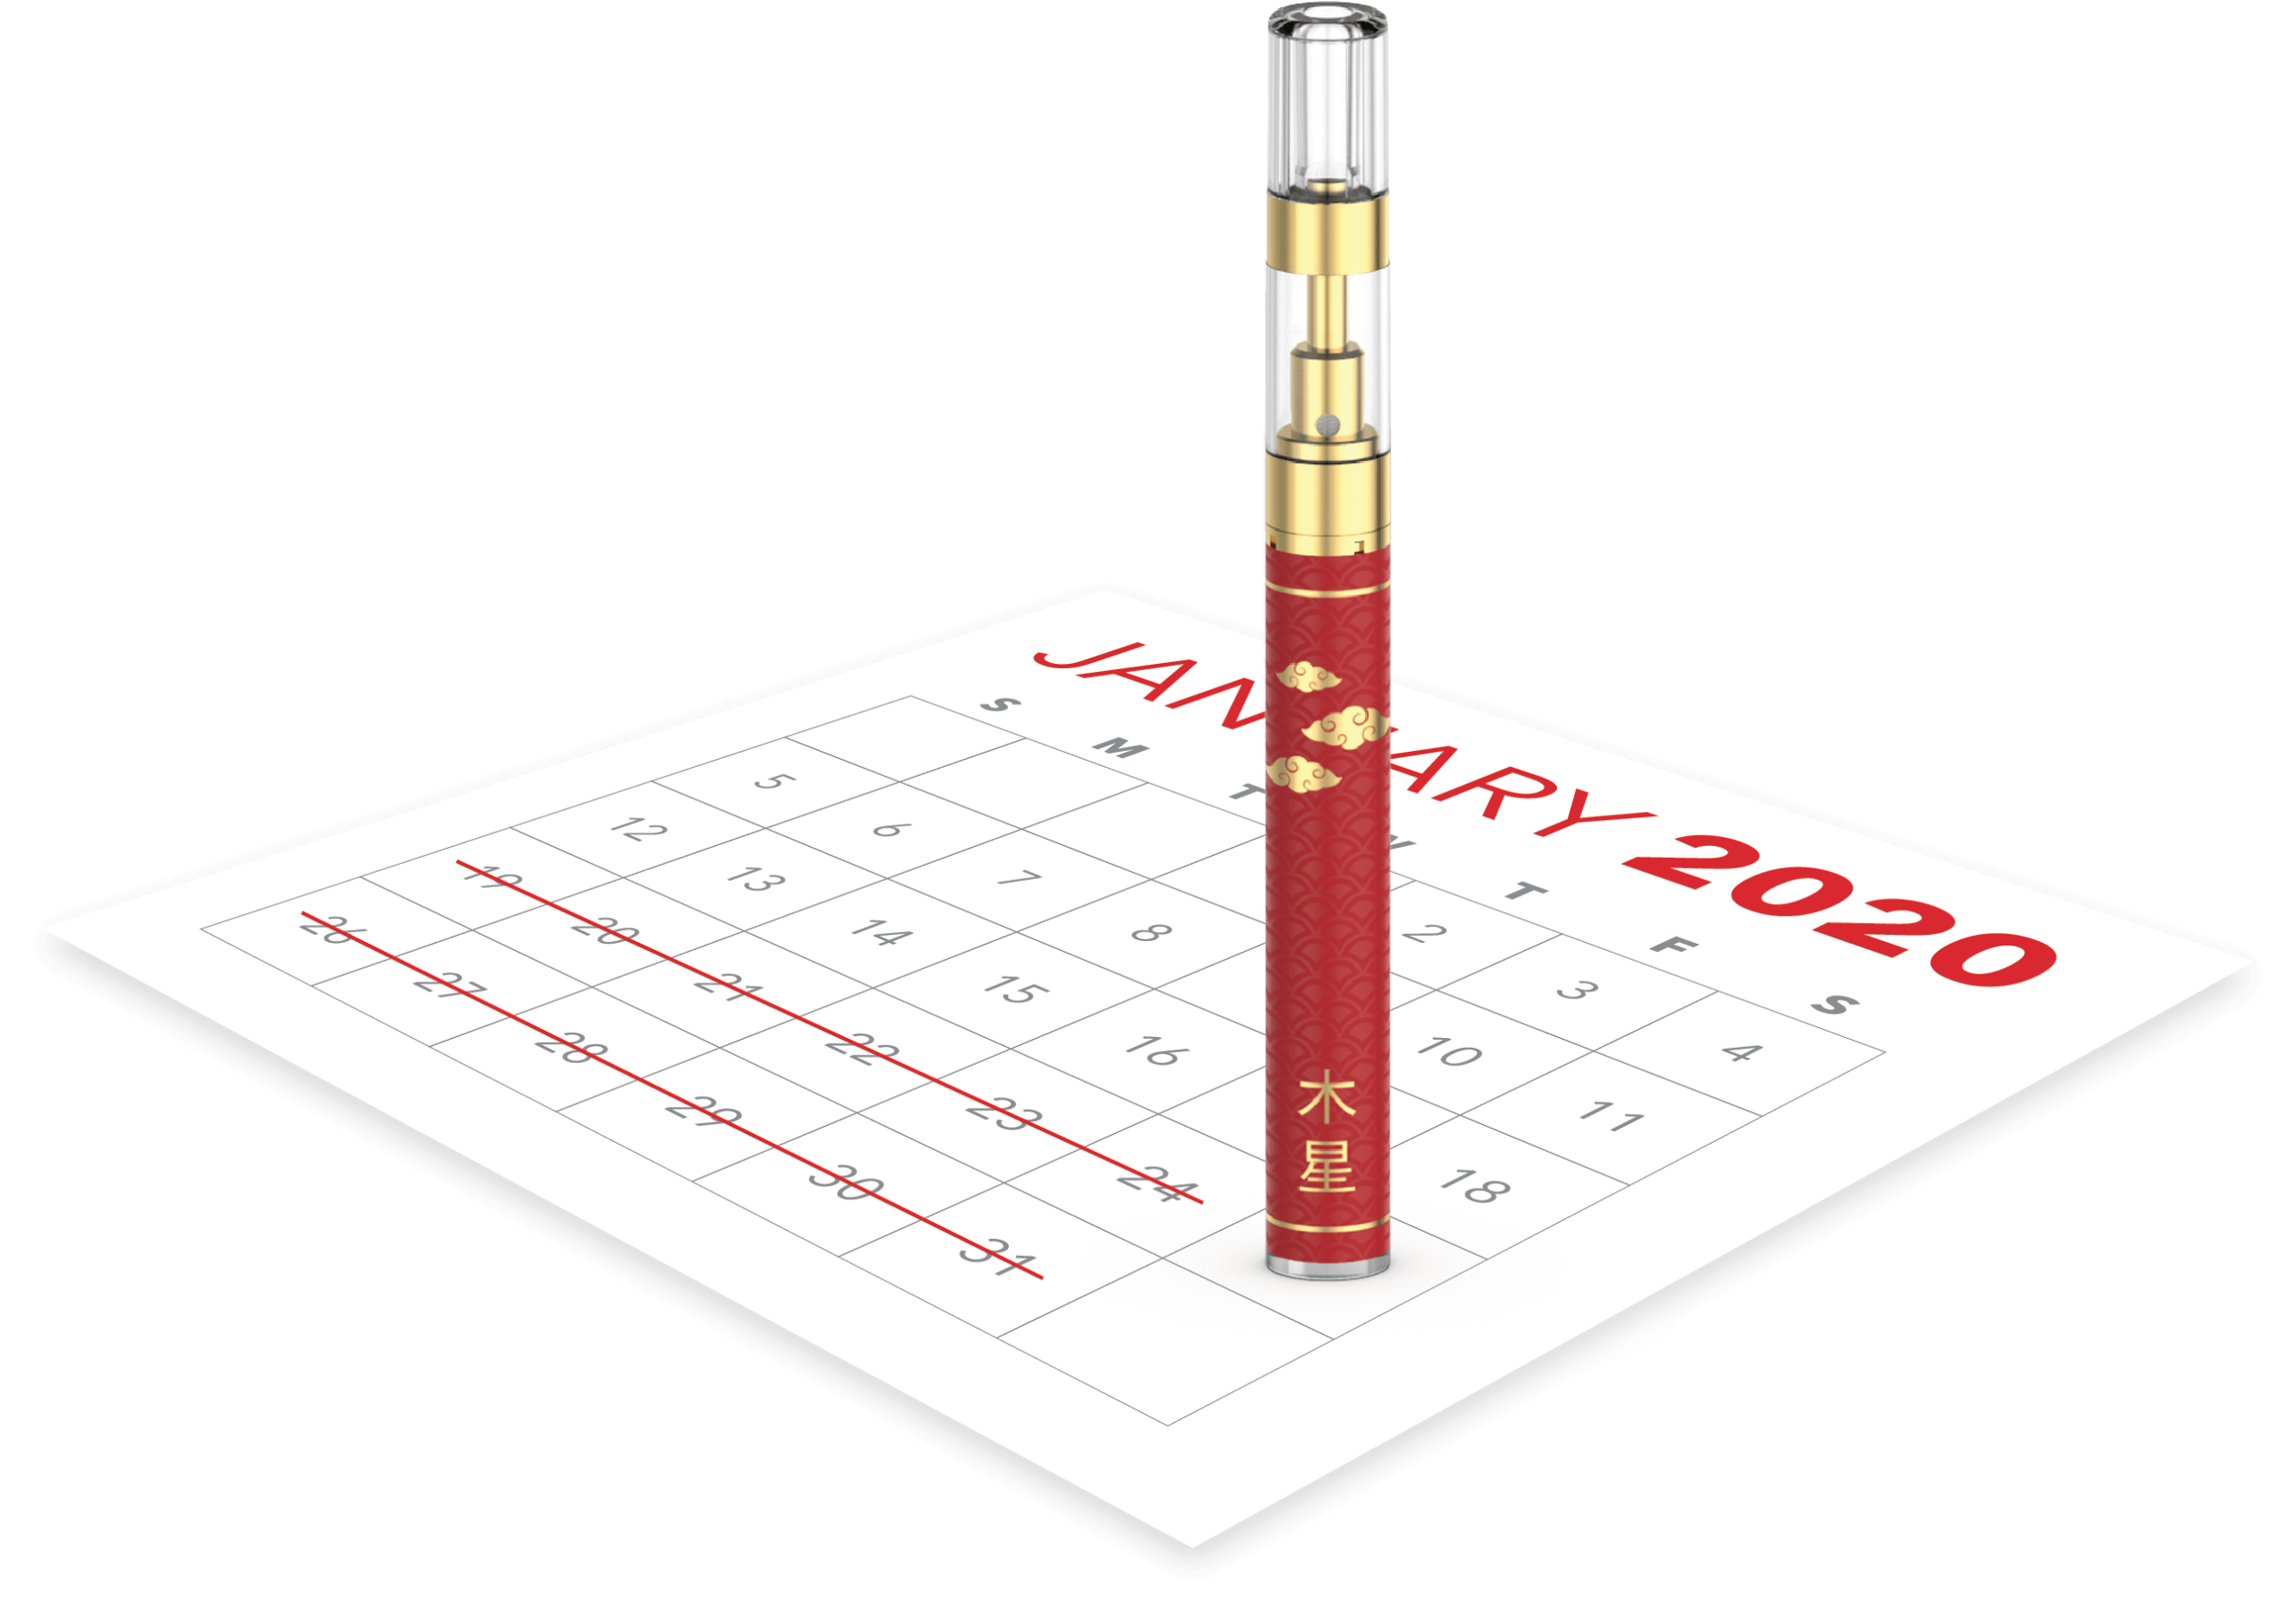 Jupiter CCELL® Liquid6 Standard Vaporizer with Year of the Rat Chinese New Year Graphic on Calendar